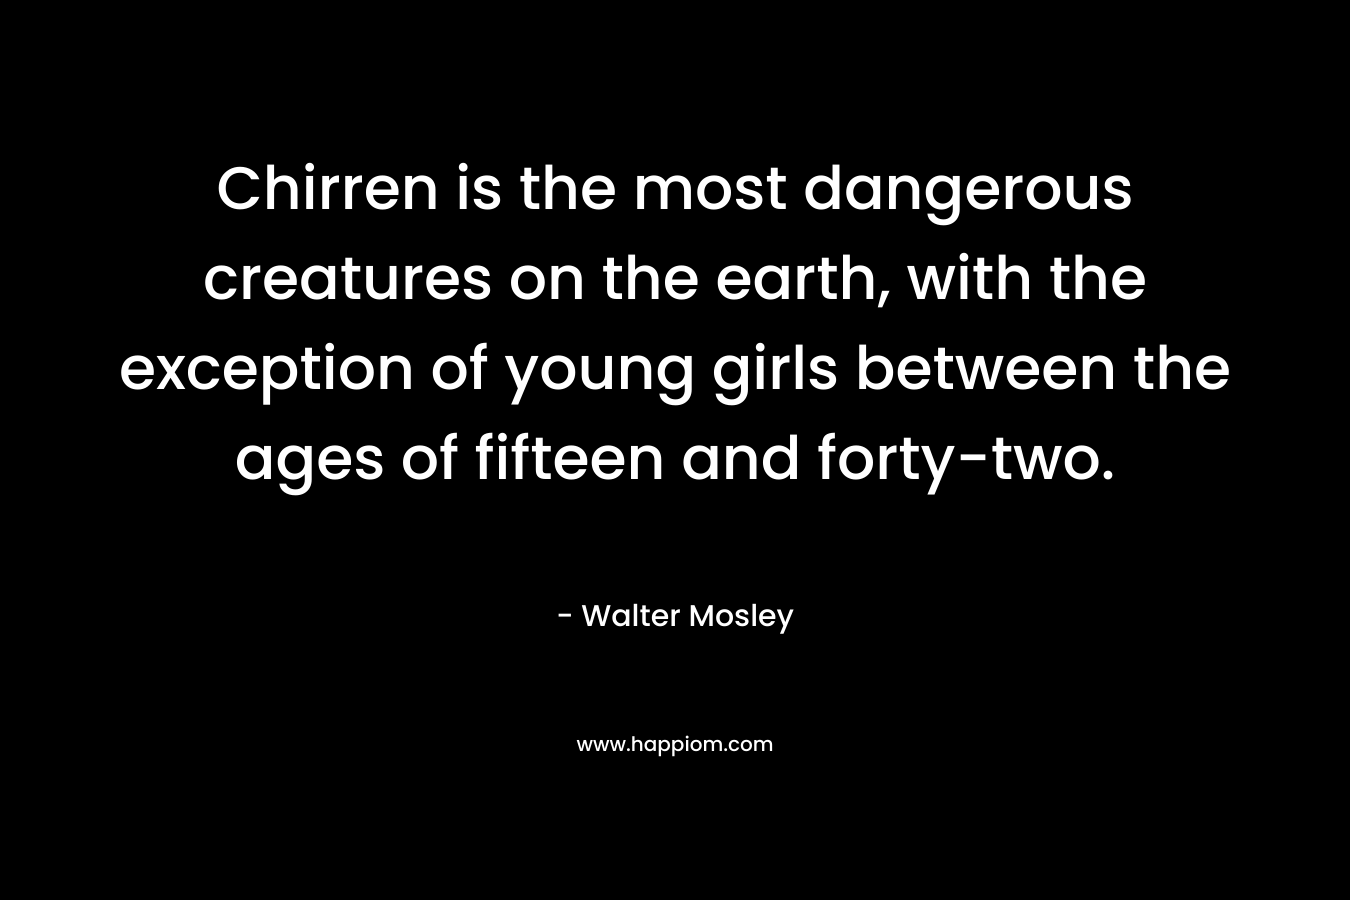 Chirren is the most dangerous creatures on the earth, with the exception of young girls between the ages of fifteen and forty-two.